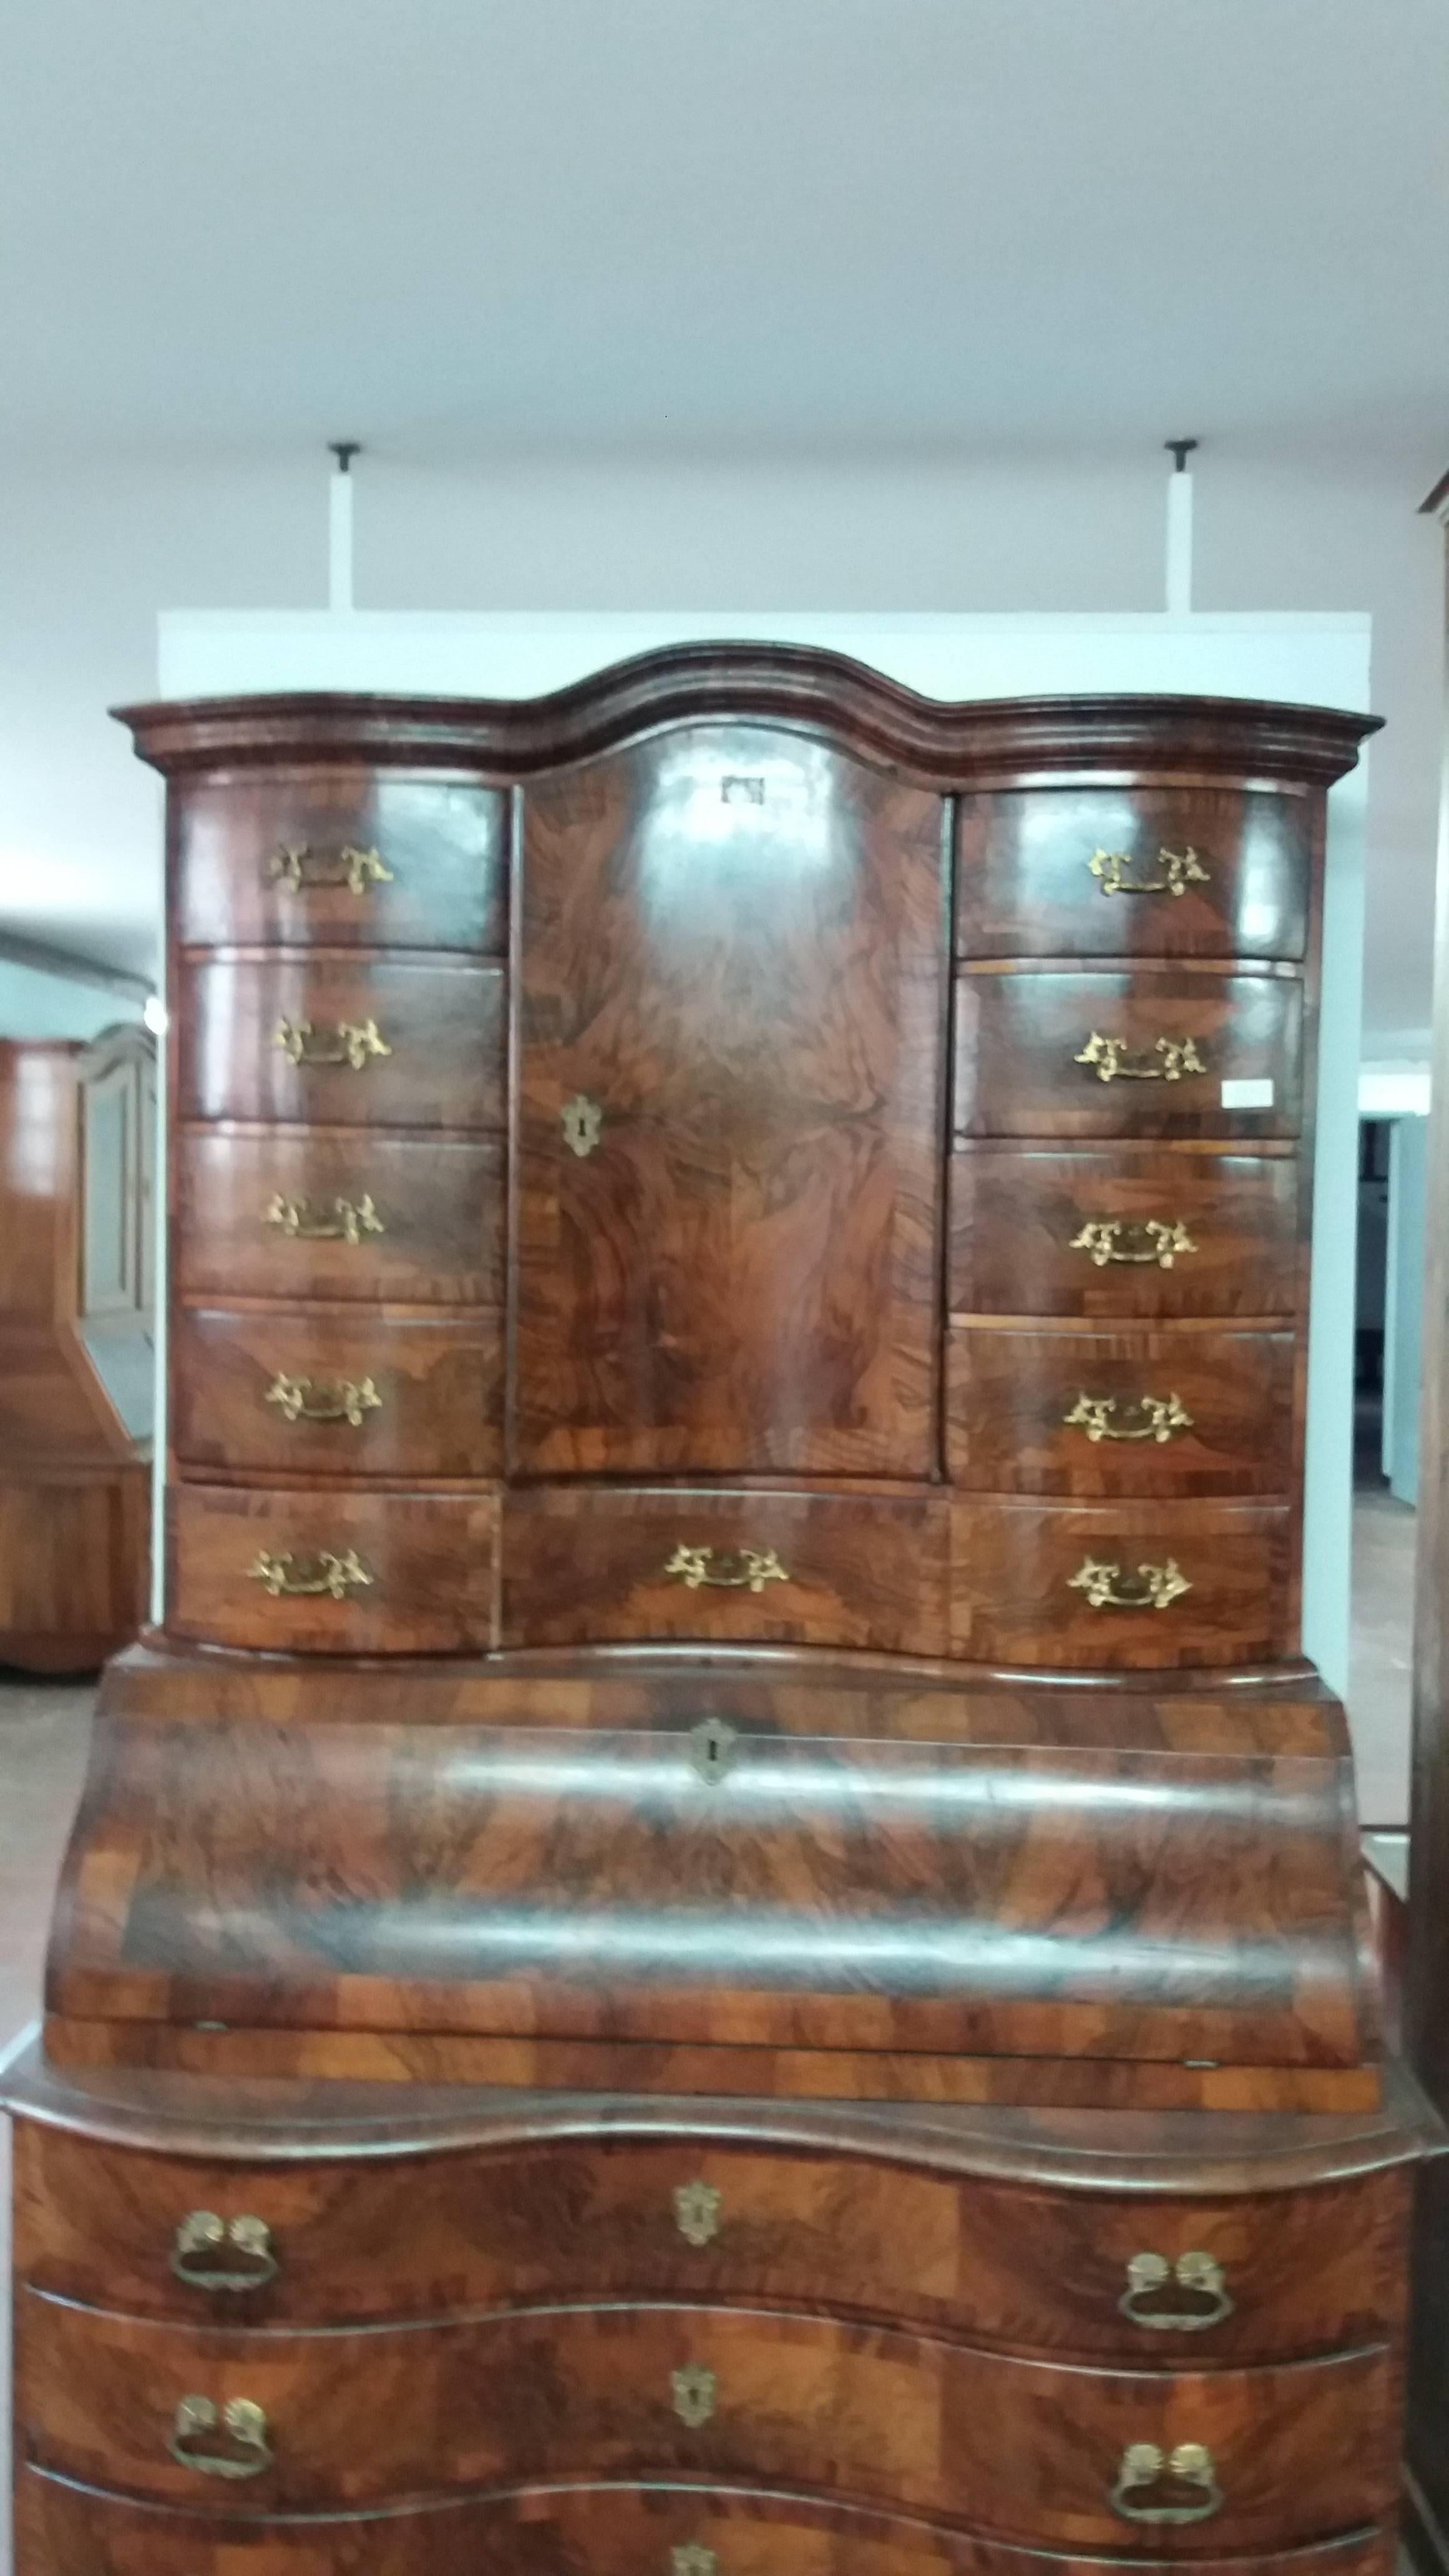 Elegant trumeau made entirely by hand in 1700 in France.
Walnut root plating, headed wood frame,
the interior of small drawers in precious woods make it an object with attention to the small details.
It has to be restored-the Restauration takes